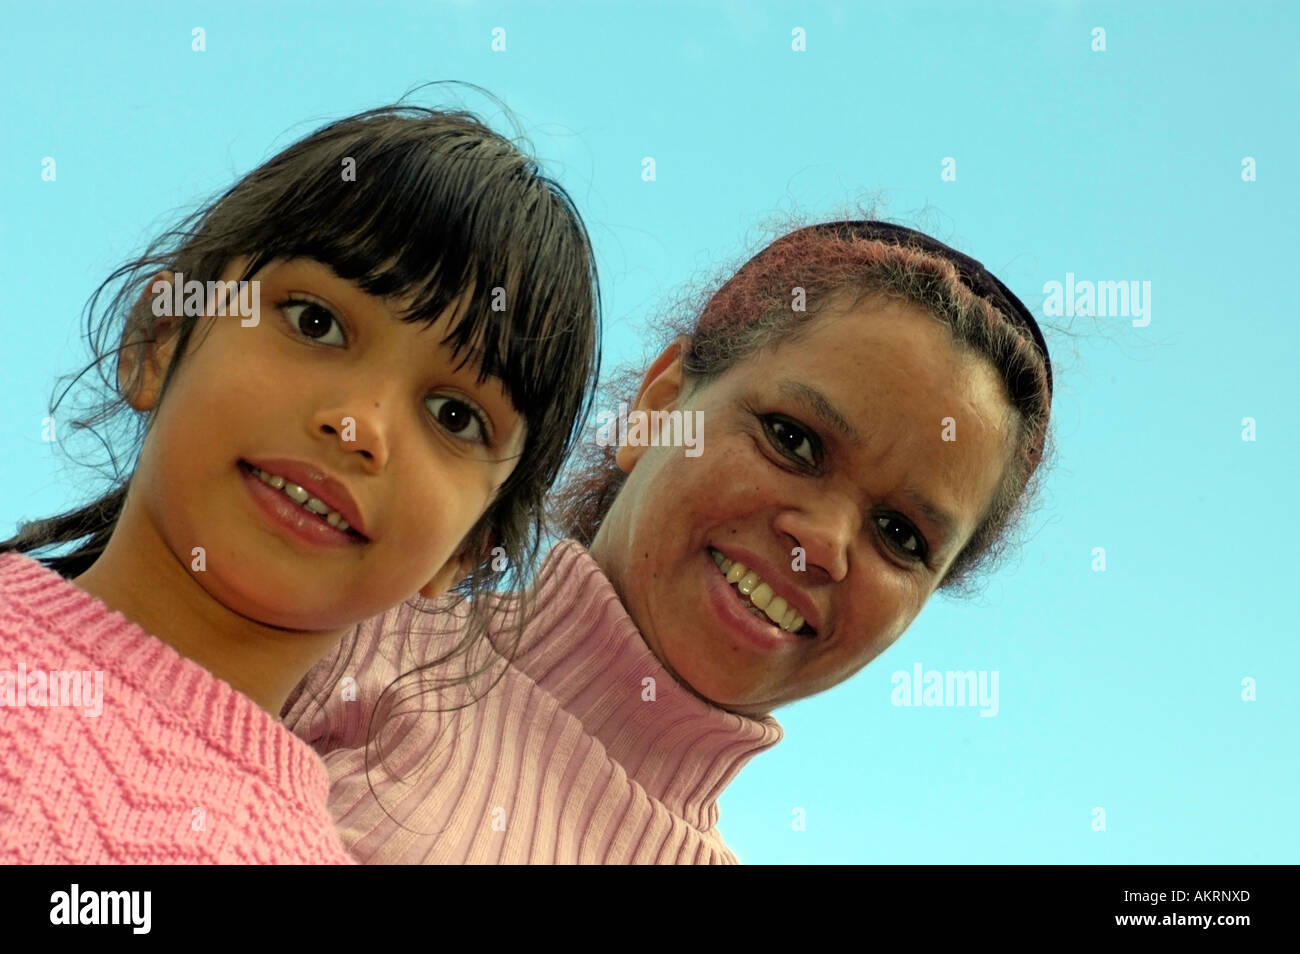 mother and daughter face of a woman and a girl swarthy dark skinned worm s eye view Stock Photo